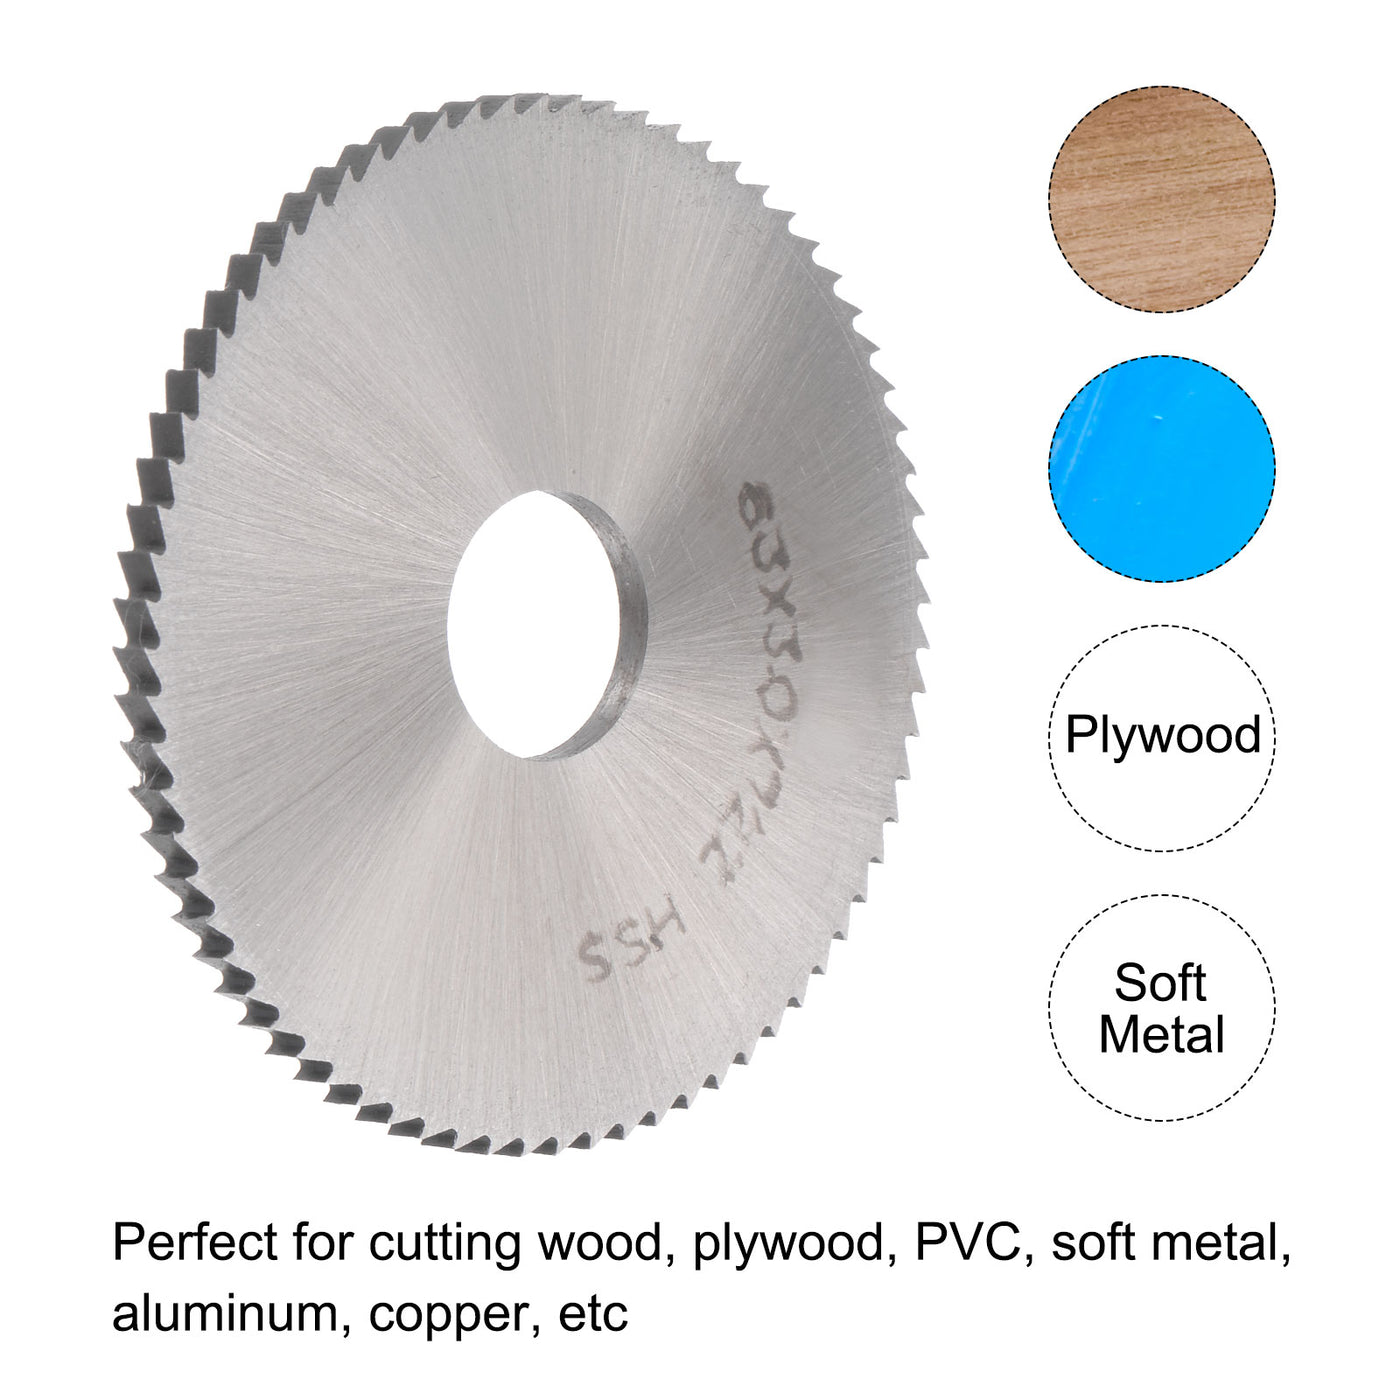 Uxcell Uxcell 63mm Dia 16mm Arbor 0.6mm Thick 72 Tooth High Speed Steel Circular Saw Blade